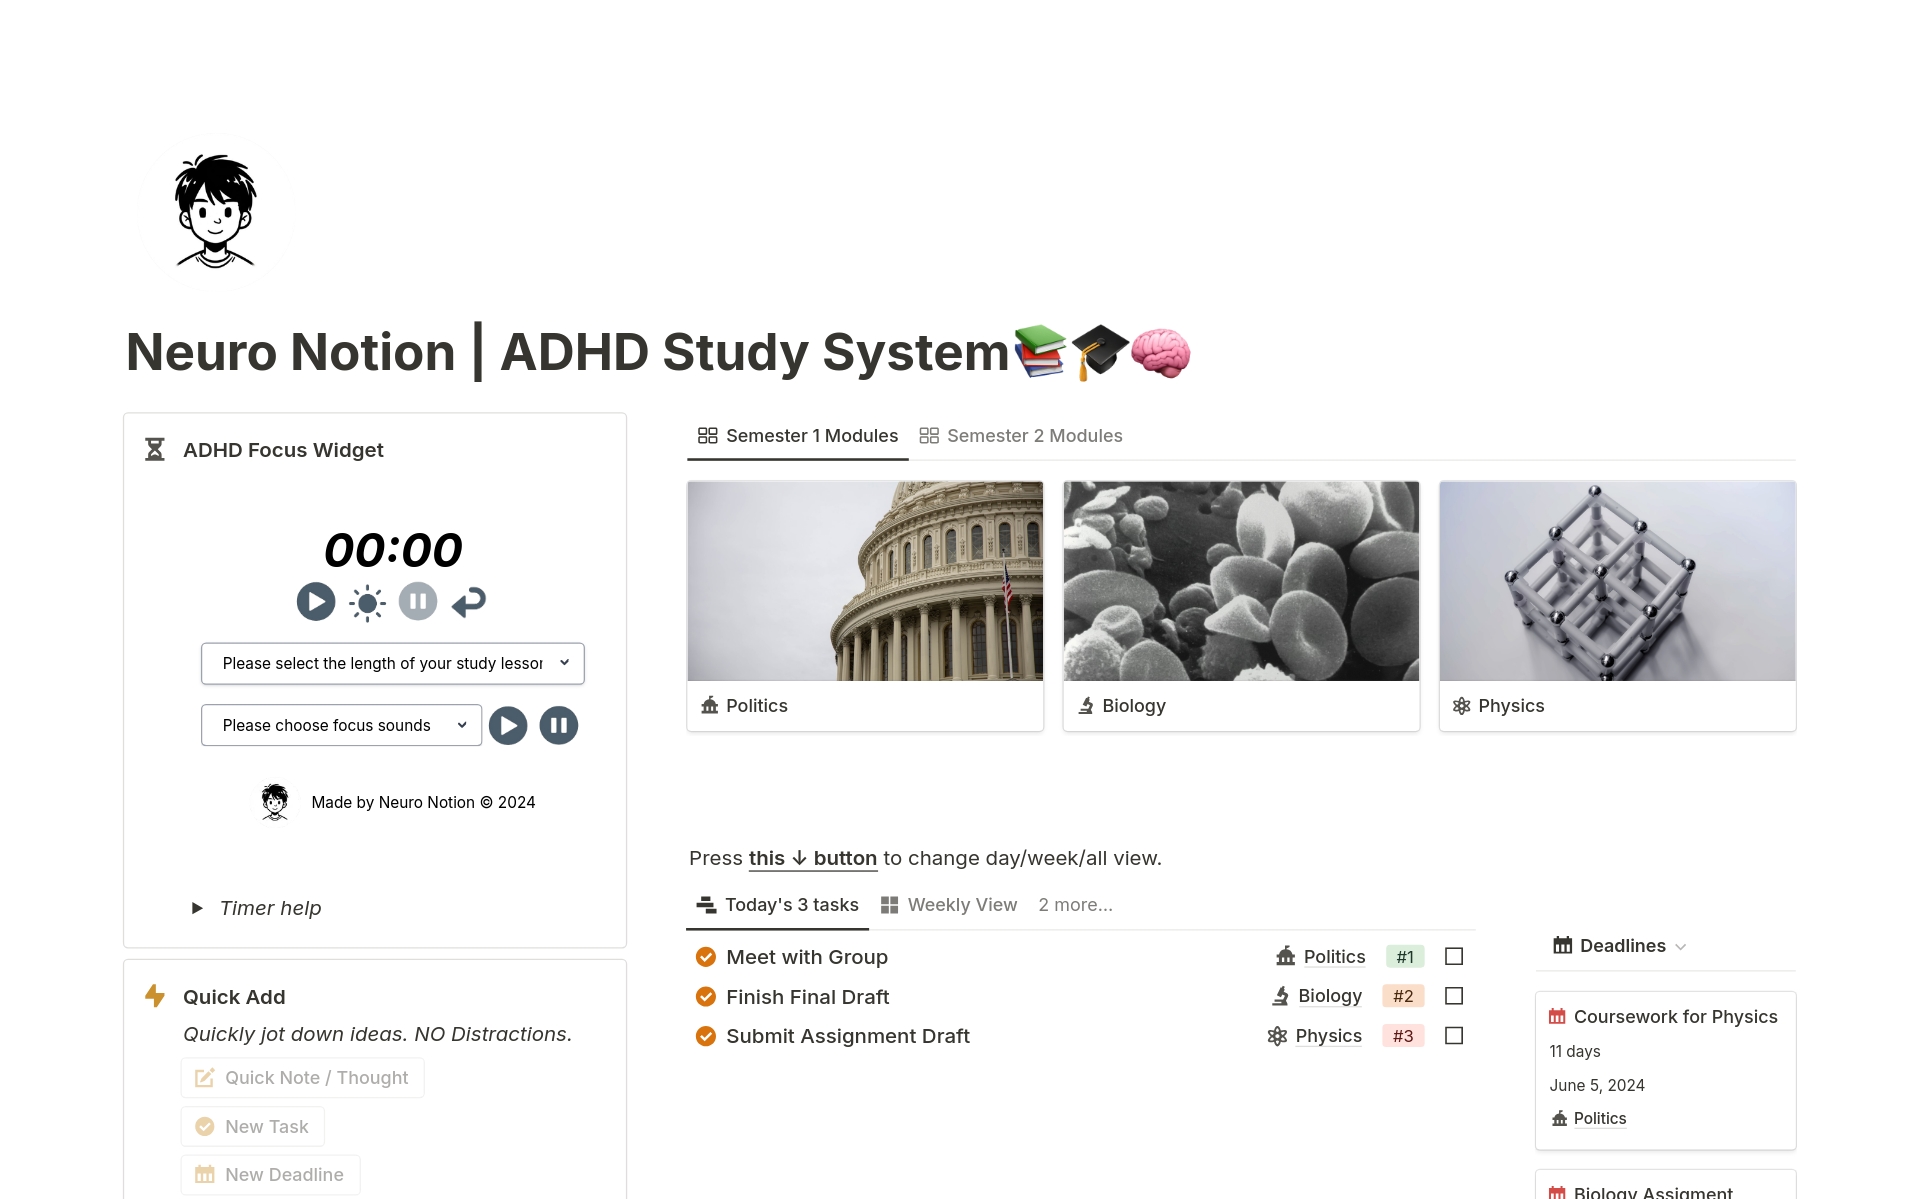 Neuro Notion is the only productivity system scientifically designed around the ADHD brain. It lets students with ADHD stay laser-focused, for longer, without distractions.